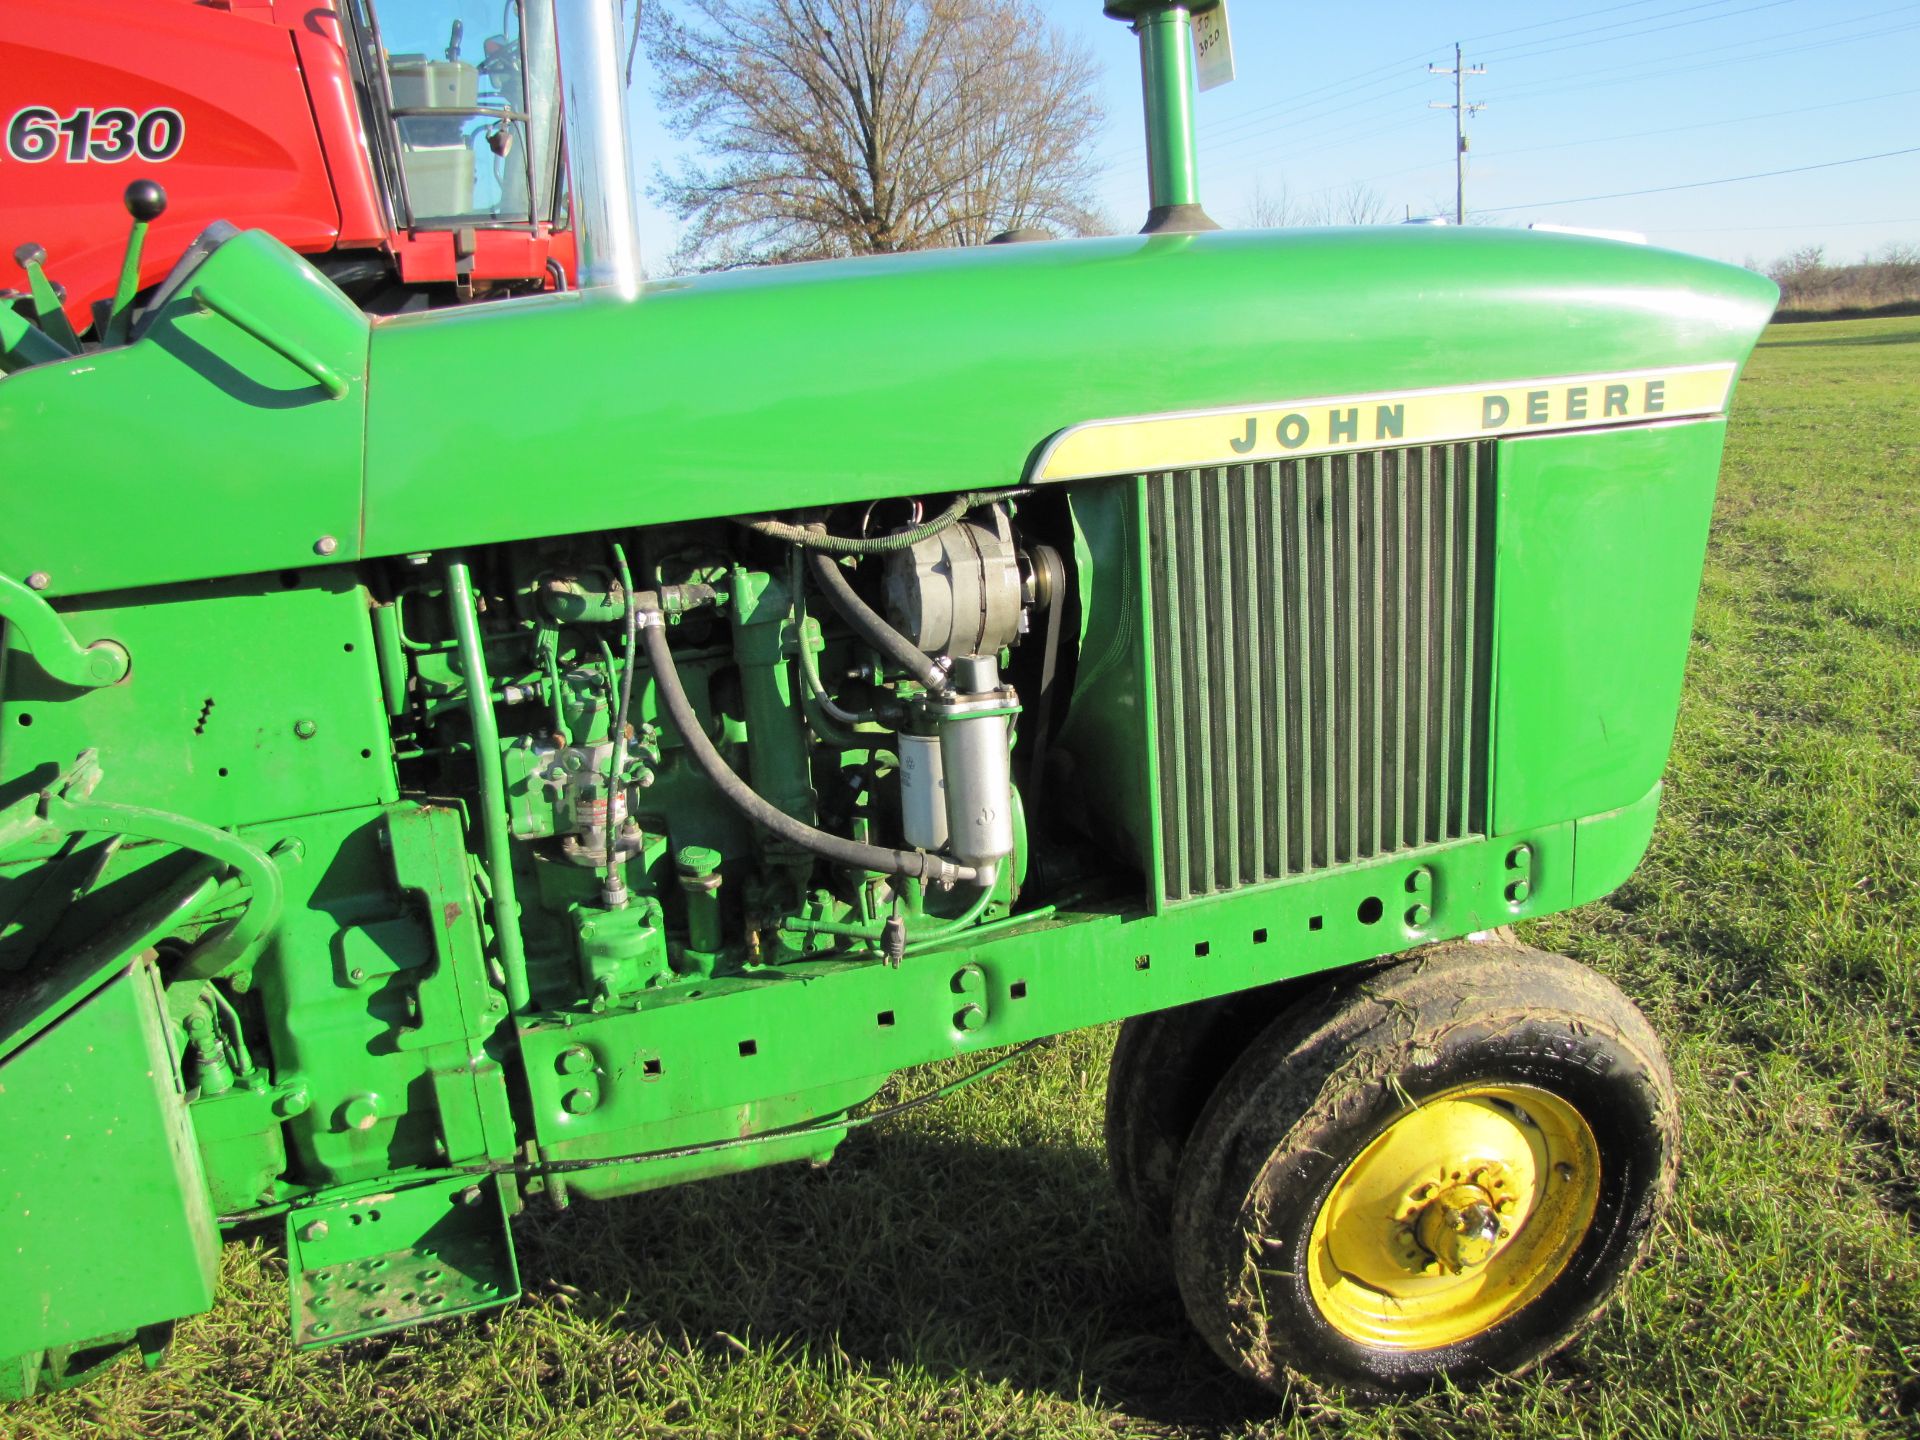 John Deere 3020 tractor, diesel, narrow front, 16.9-34 tires, 3 pt, 2 hyd remotes, 540 pto - Image 11 of 29